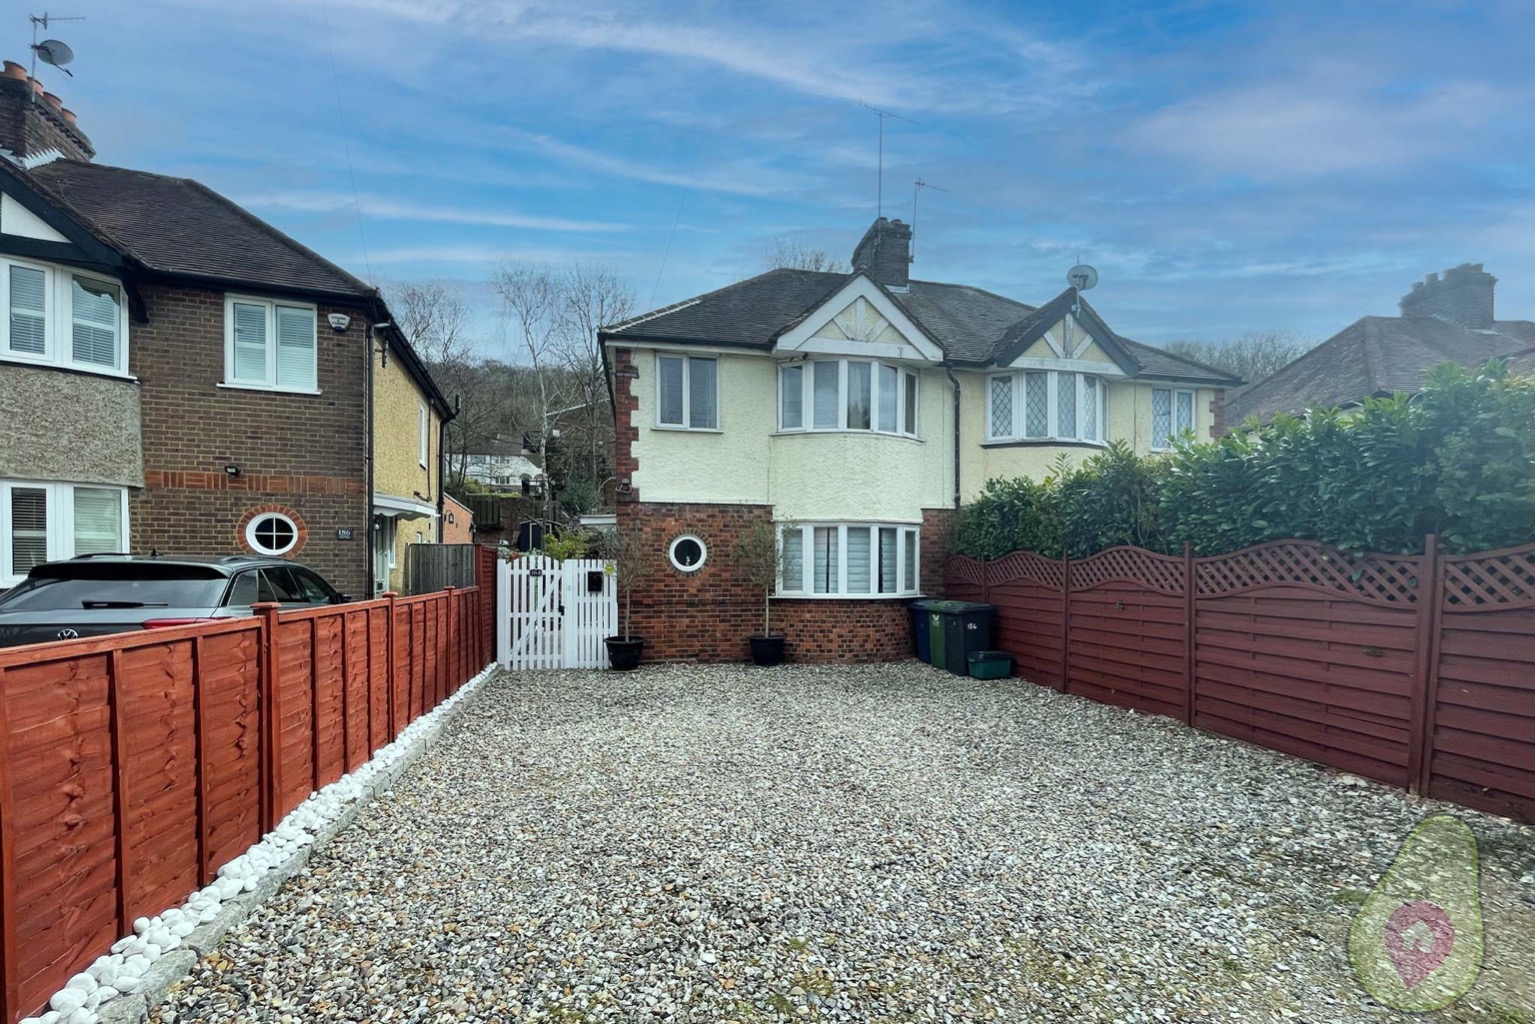 3 bed semi-detached house for sale in Micklefield Road, High Wycombe, HP13